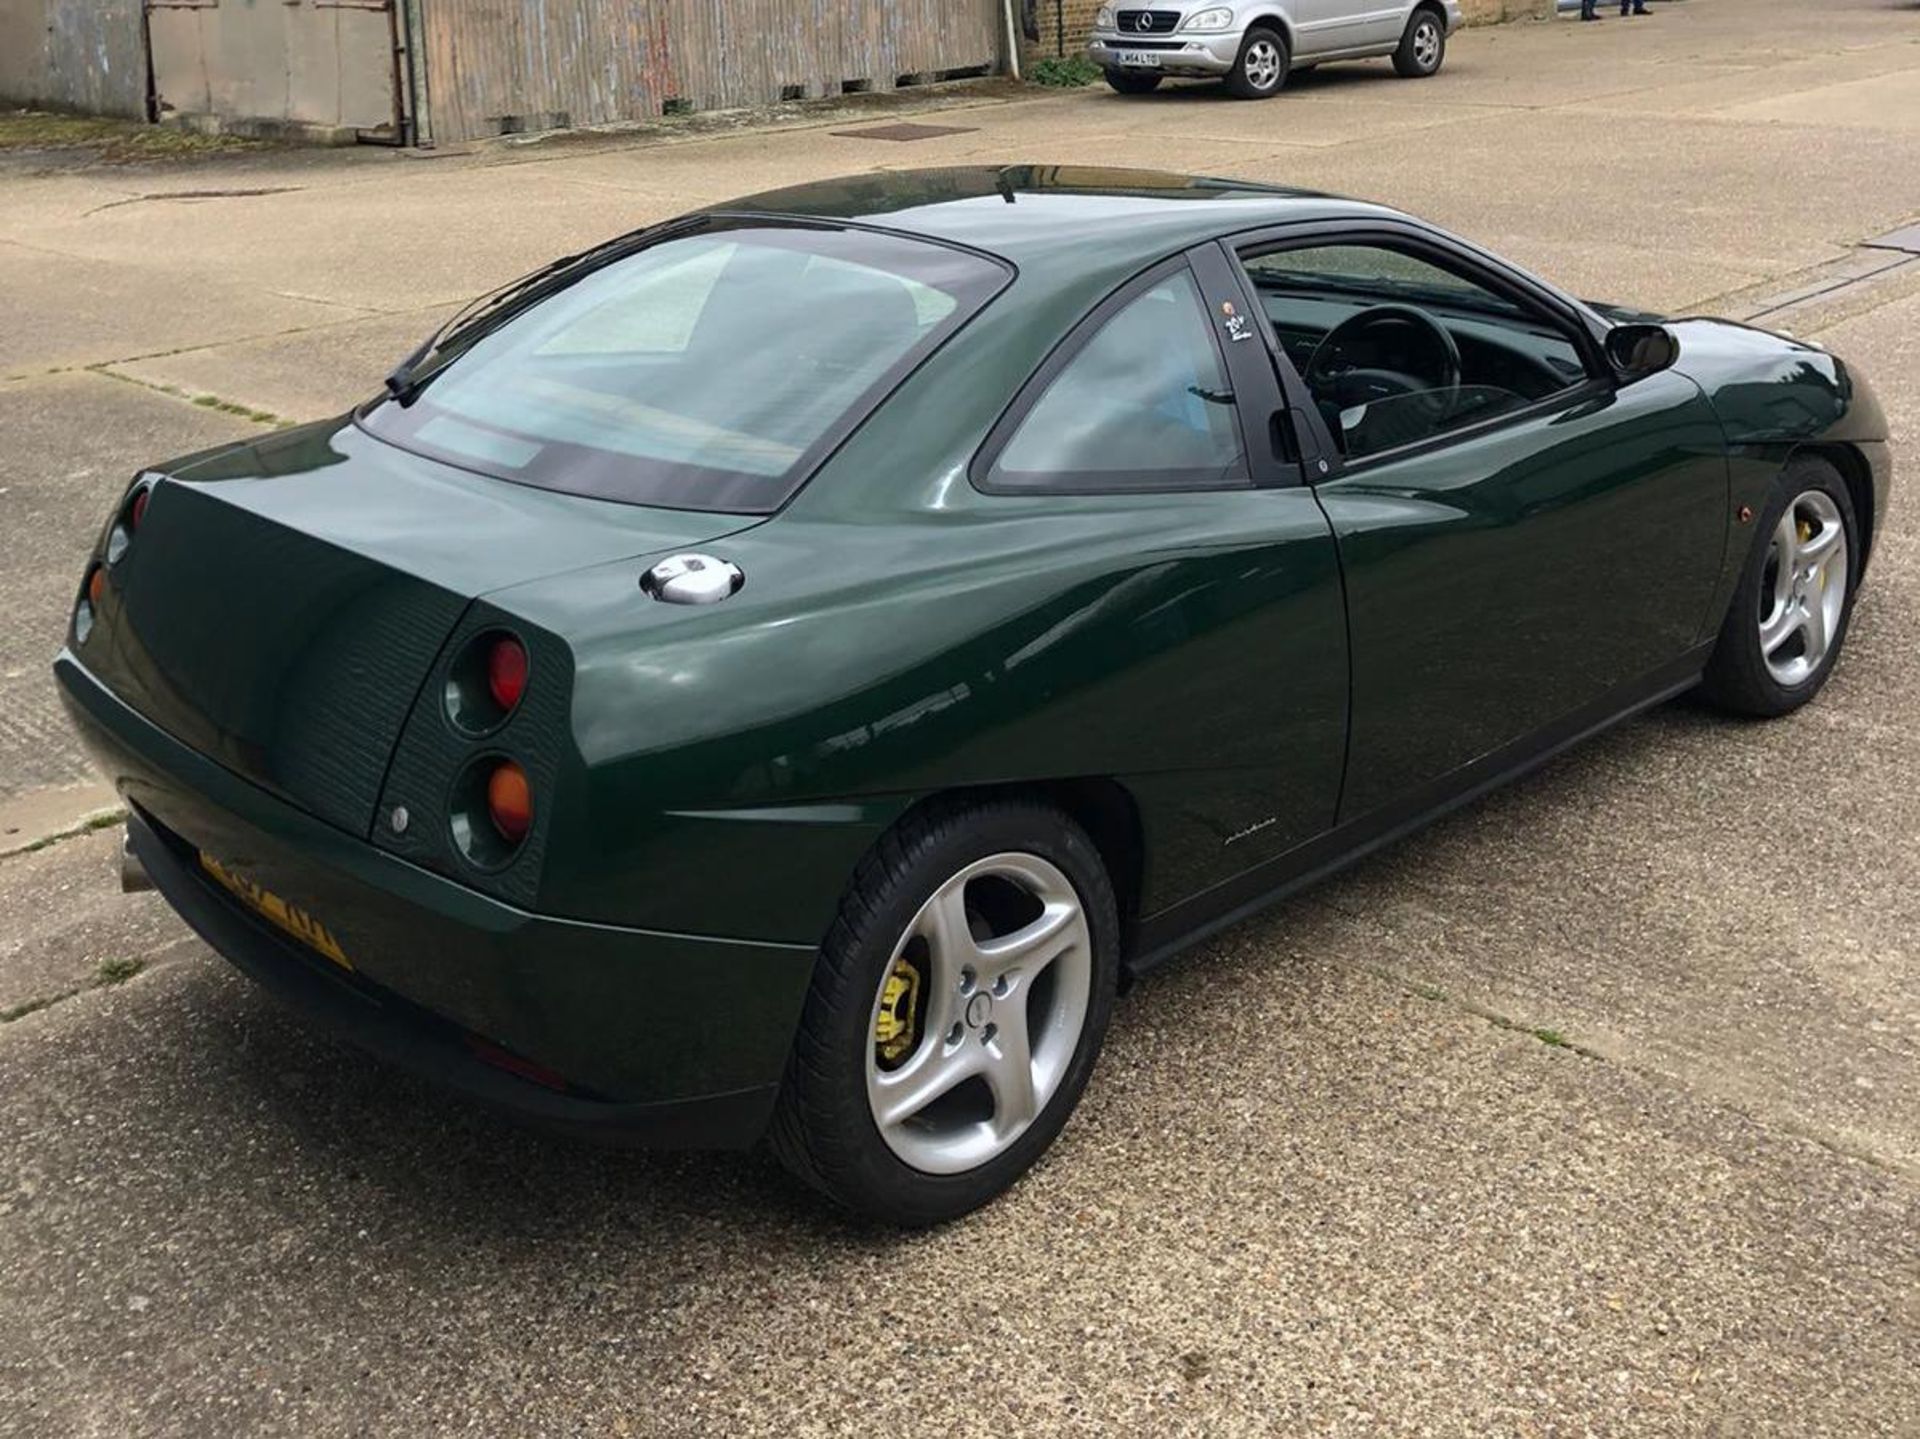 1997 Fiat Coupe 20V Turbo - Image 2 of 5